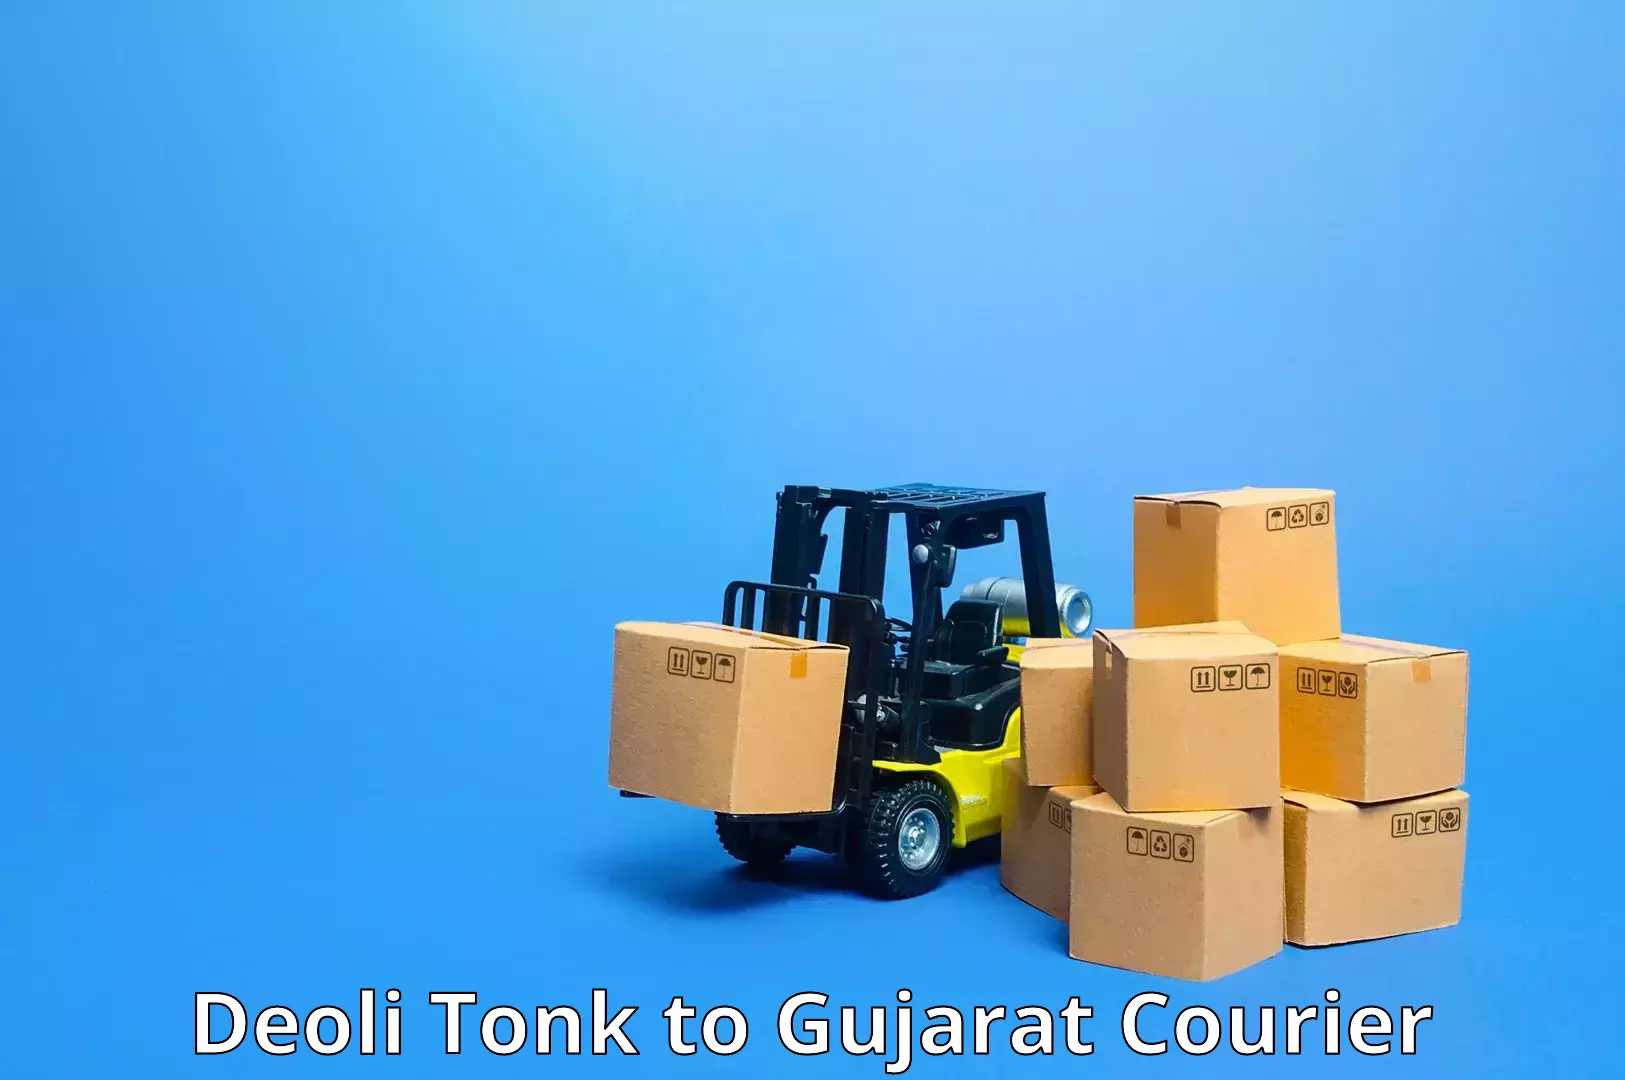 Easy access courier services Deoli Tonk to Bardoli